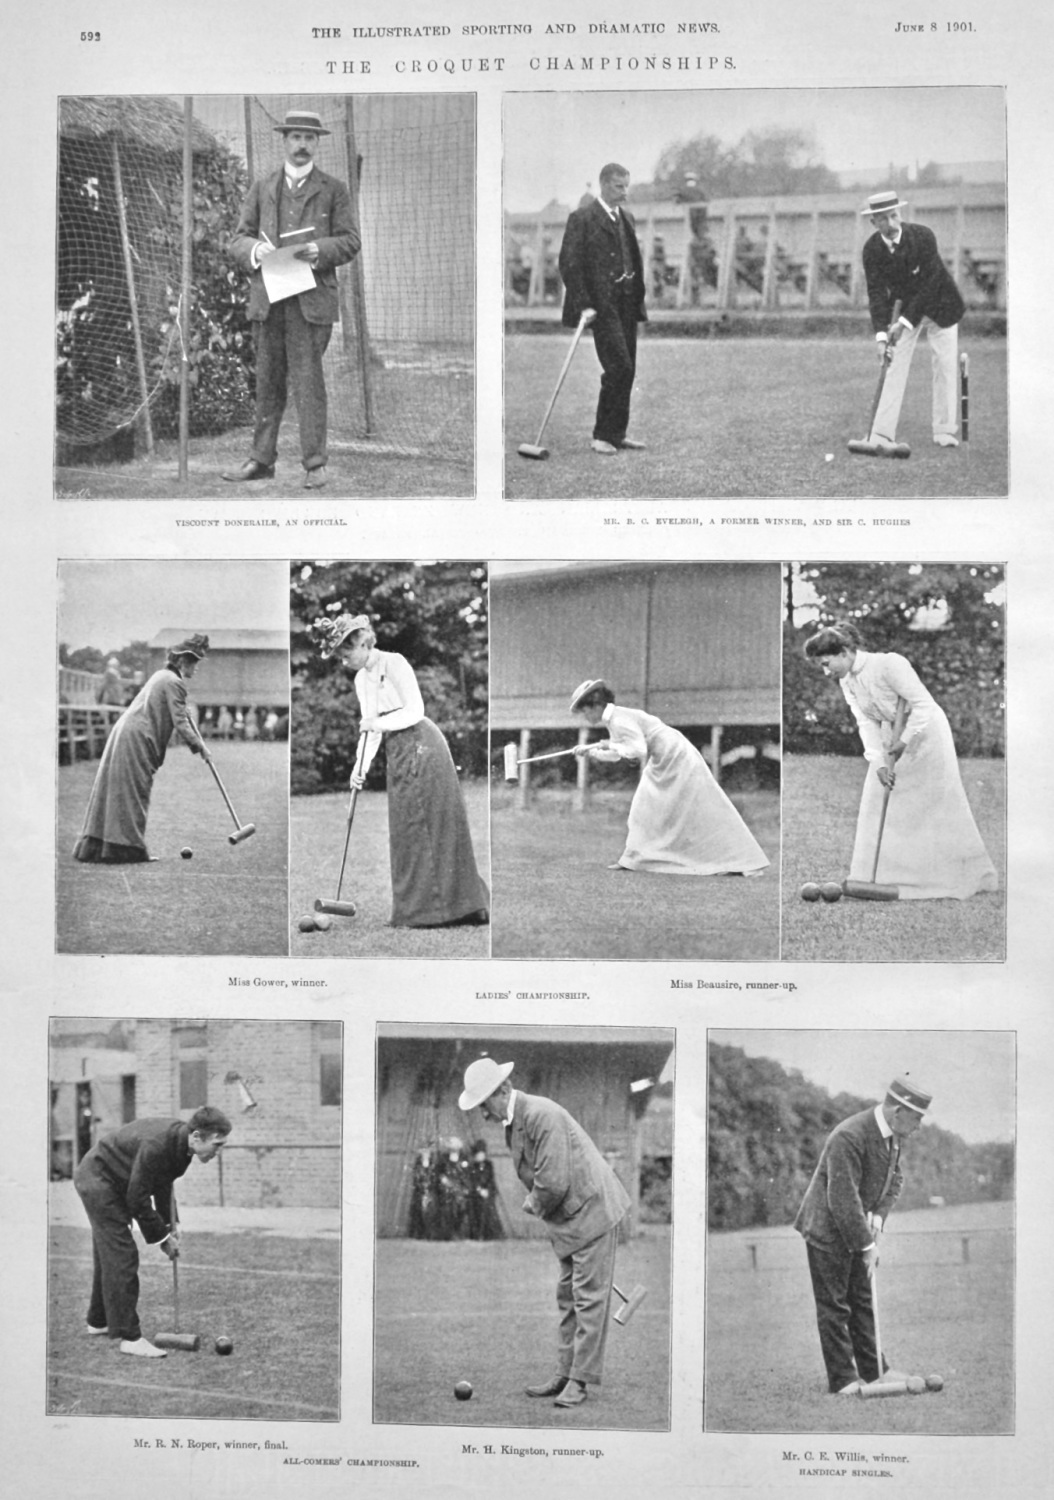 The Croquet Championships.  1901.